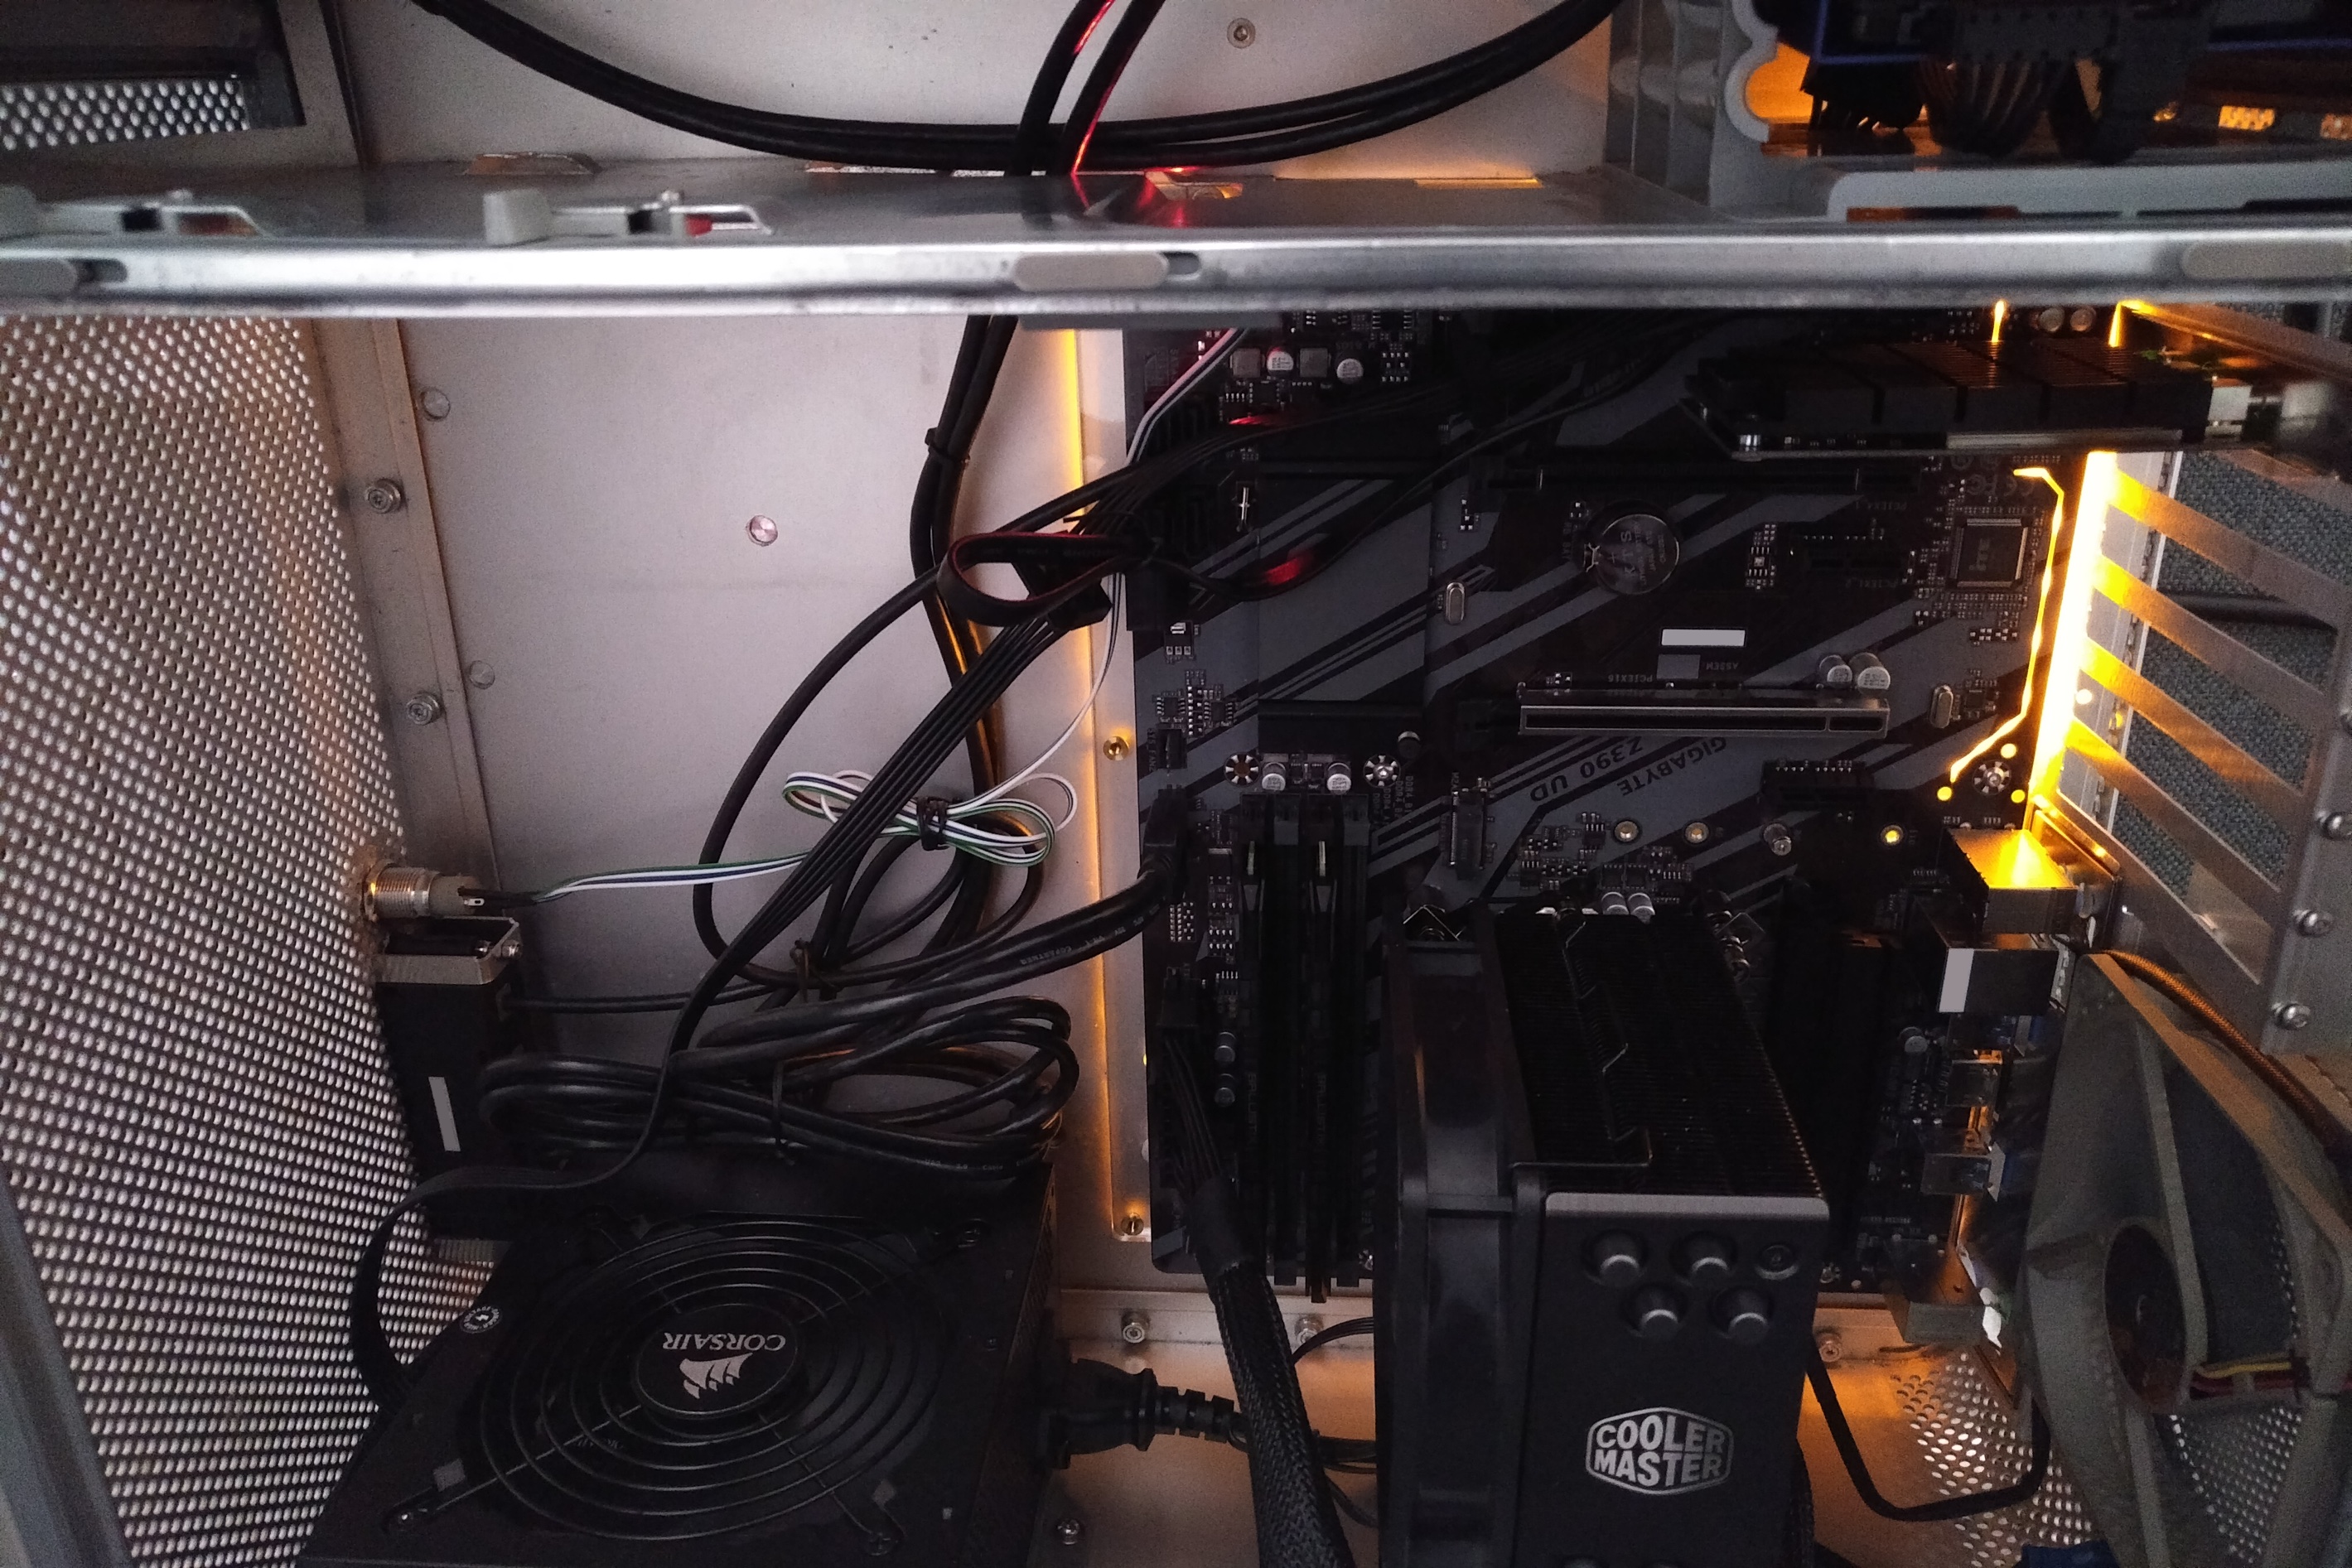 Finished interior powered on. Air sent vertically out of PSU, through CPU fan, and out the case fan.